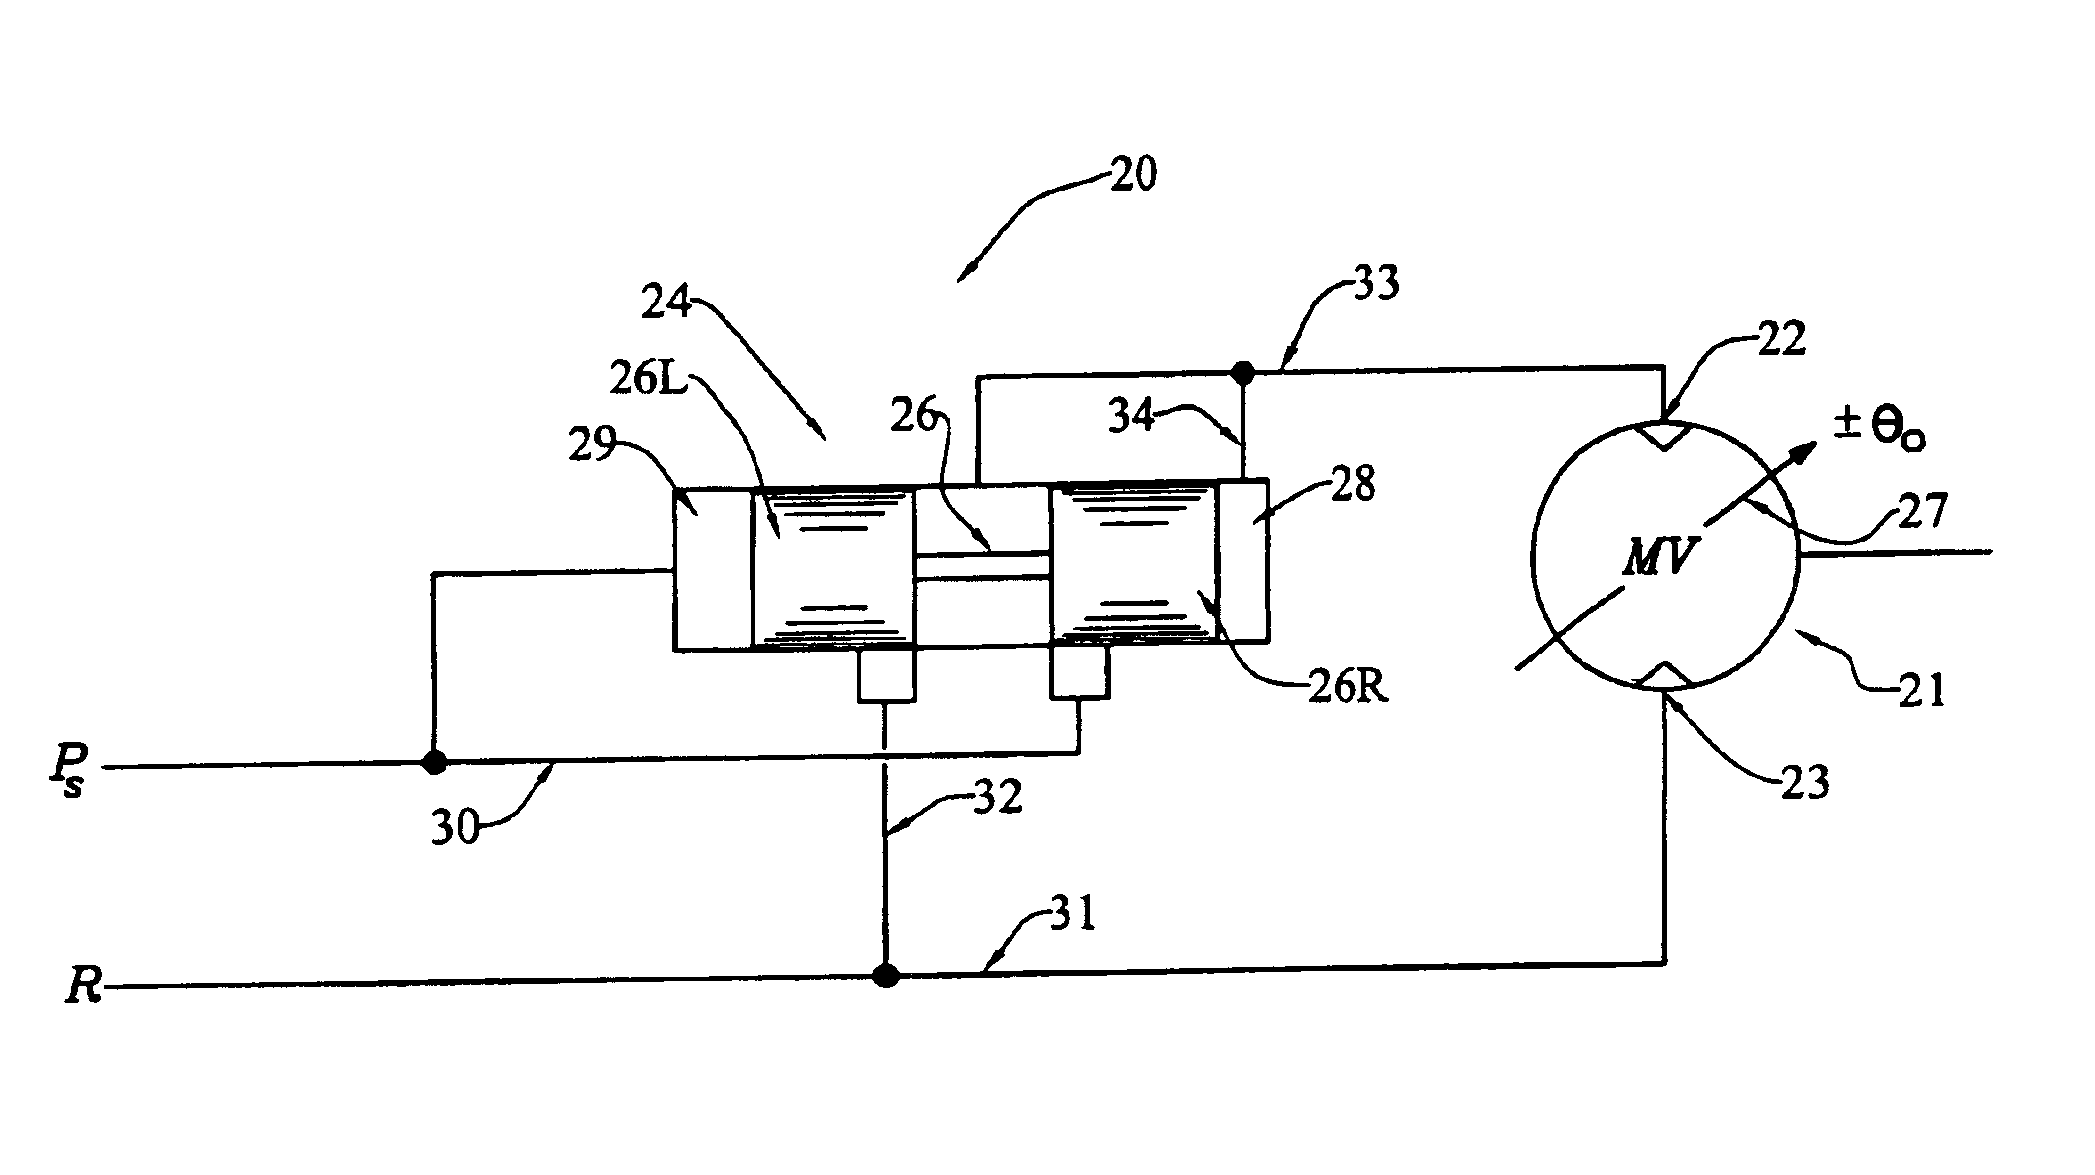 Regulated pressure supply for a variable-displacement reversible hydraulic motor